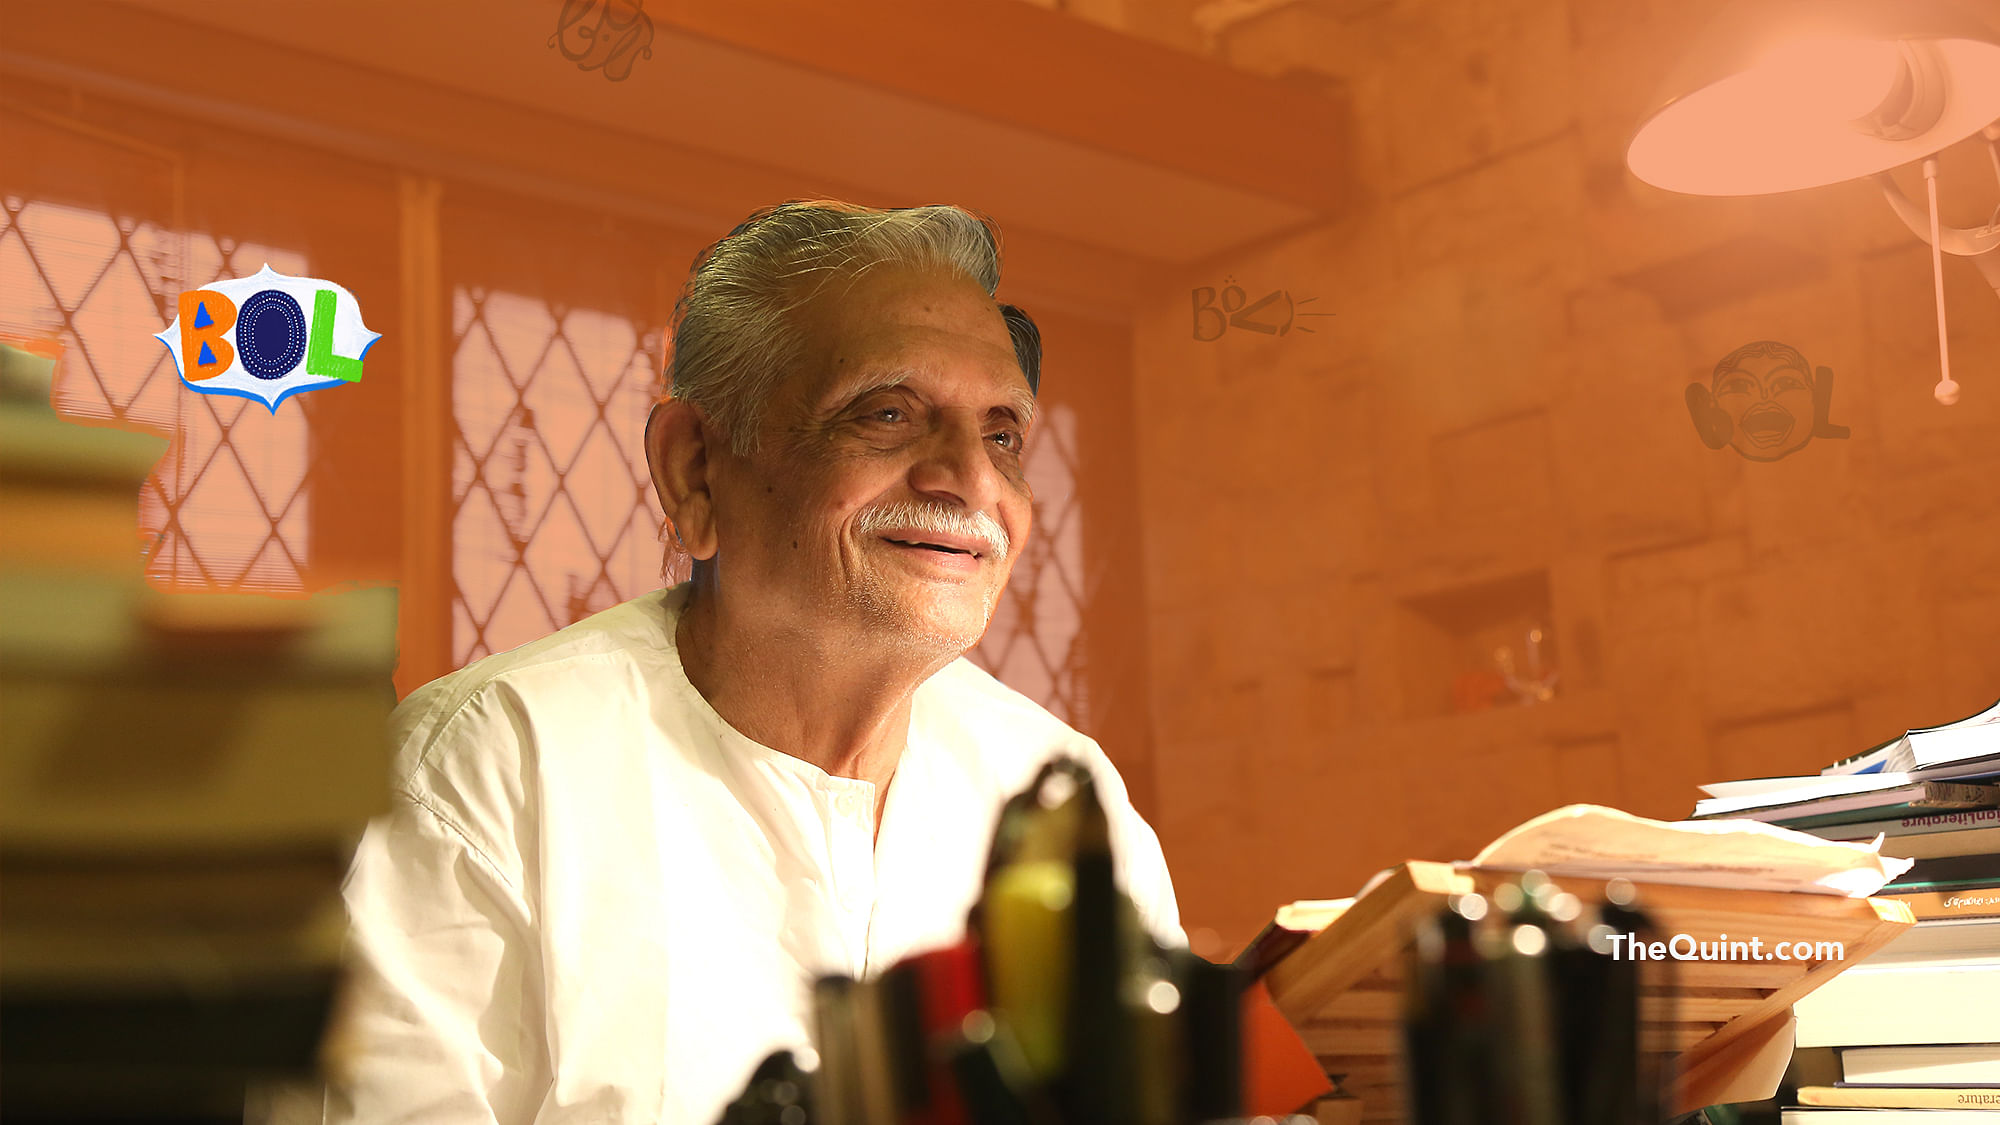 Gulzar gives us one of his trivenis – a poem in three lines – on the contemporary obsession with religion